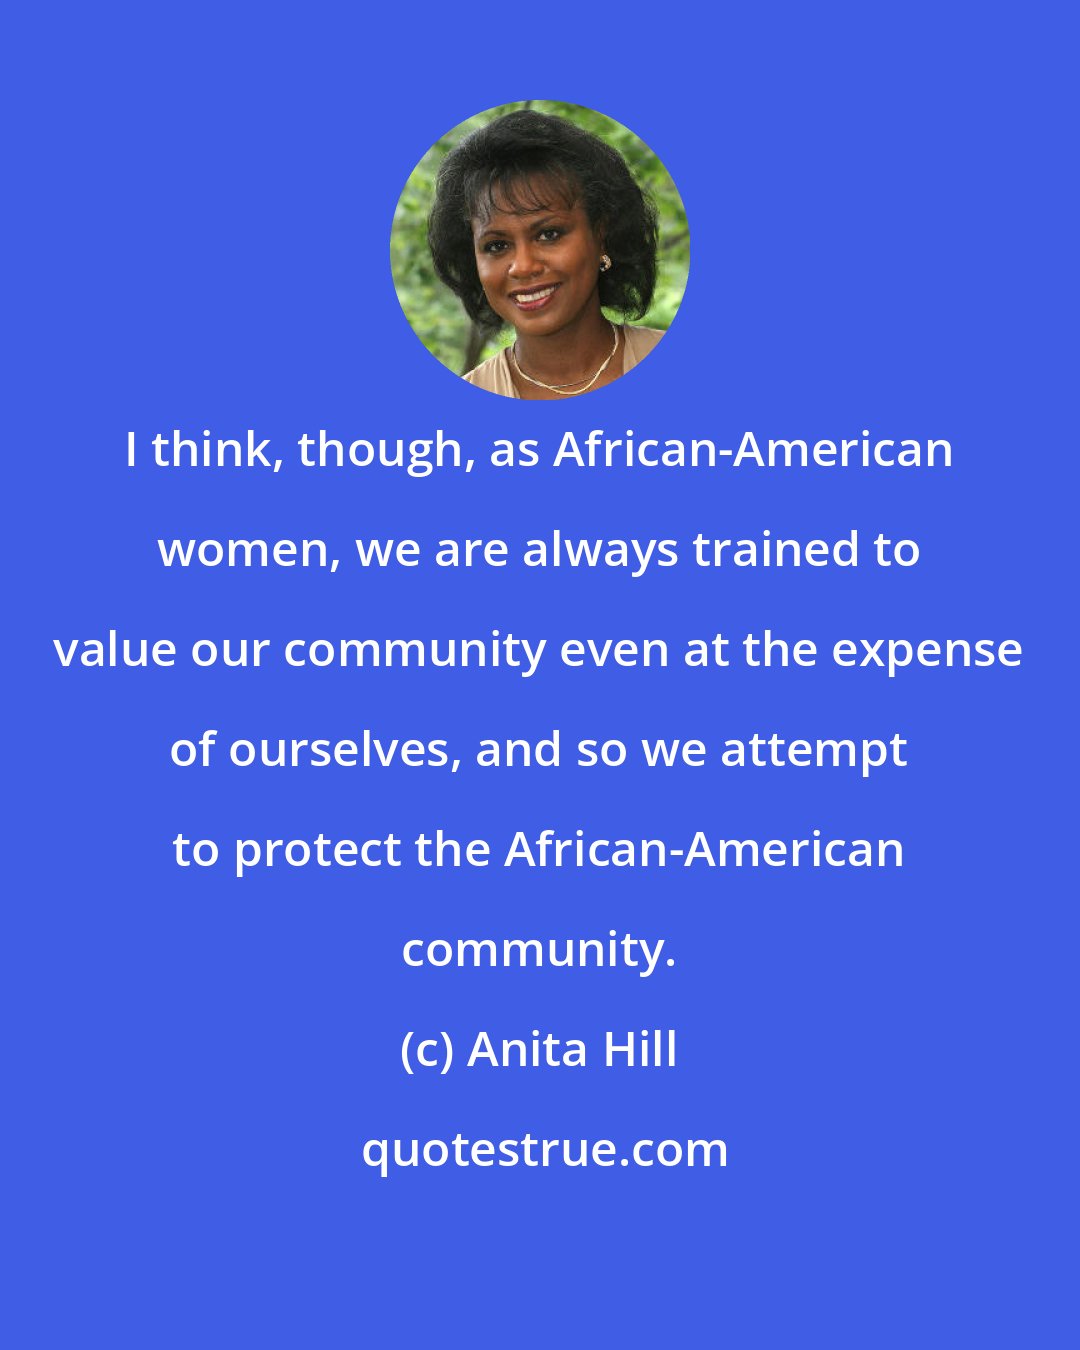 Anita Hill: I think, though, as African-American women, we are always trained to value our community even at the expense of ourselves, and so we attempt to protect the African-American community.